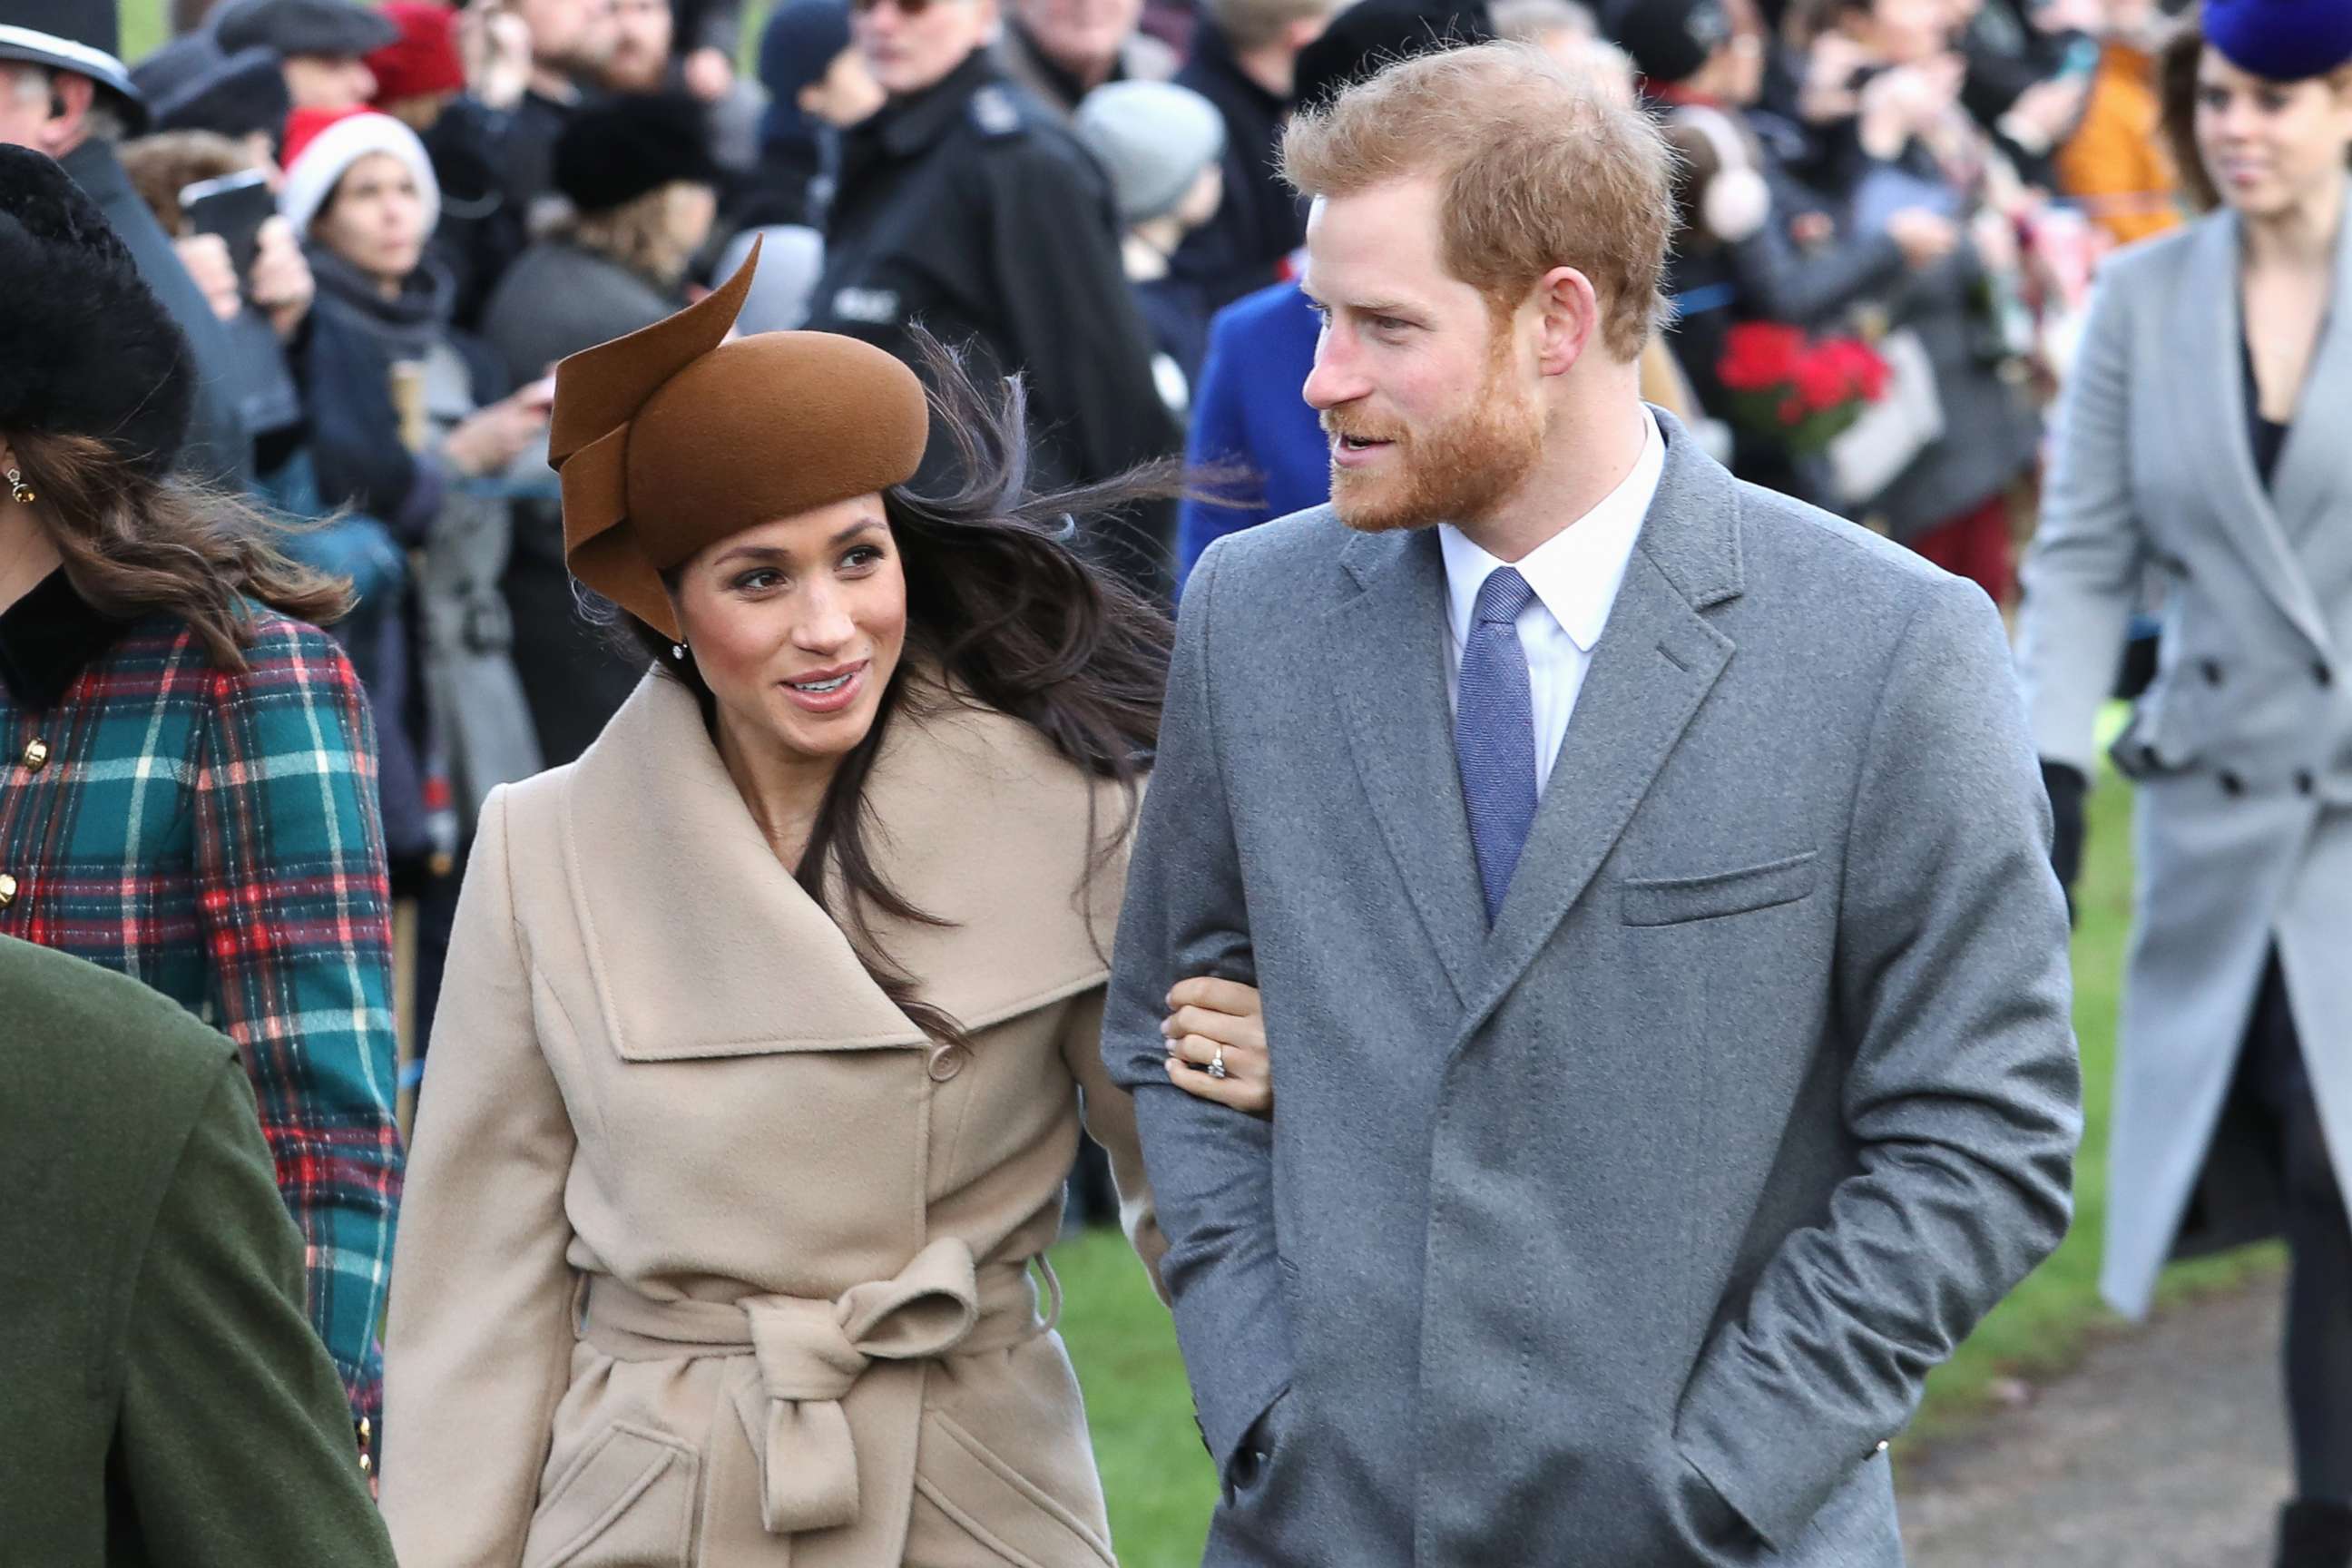 PHOTO: Meghan Markle and Prince Harry attend Christmas Day Church service at Church of St. Mary Magdalene, Dec. 25, 2017 in King's Lynn, England.